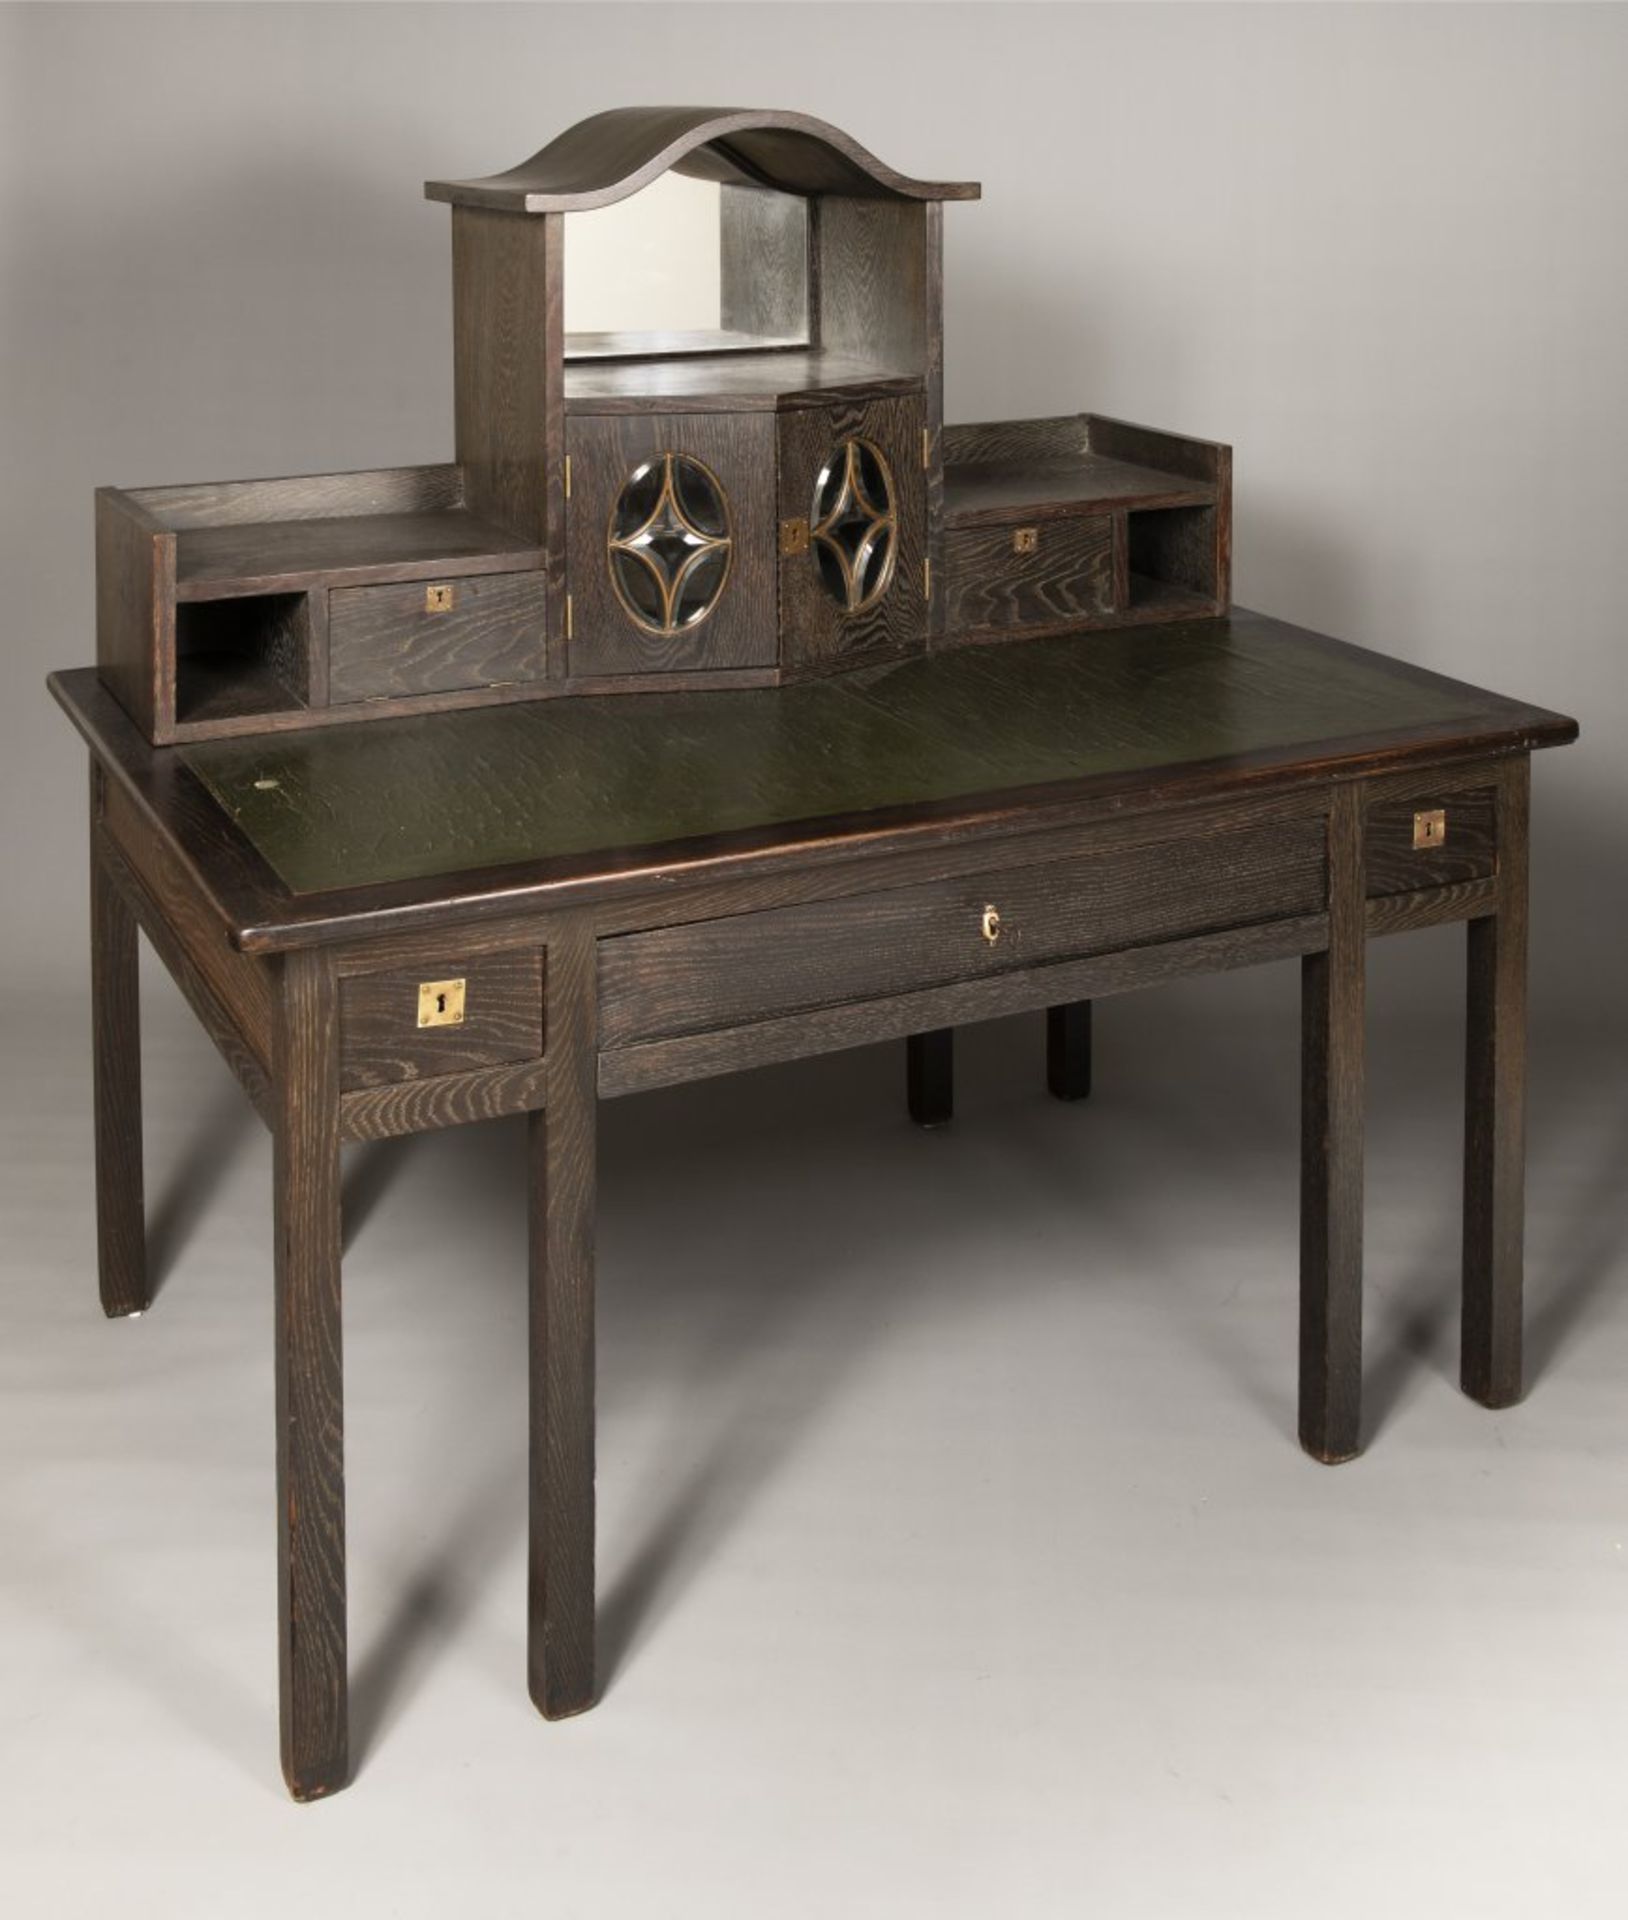 JOSEF HOFFMANN (attributed) 1870 - 1956: A FURNITURE GROUP 1905 - 1910 Pine and blackened oak with - Bild 5 aus 8